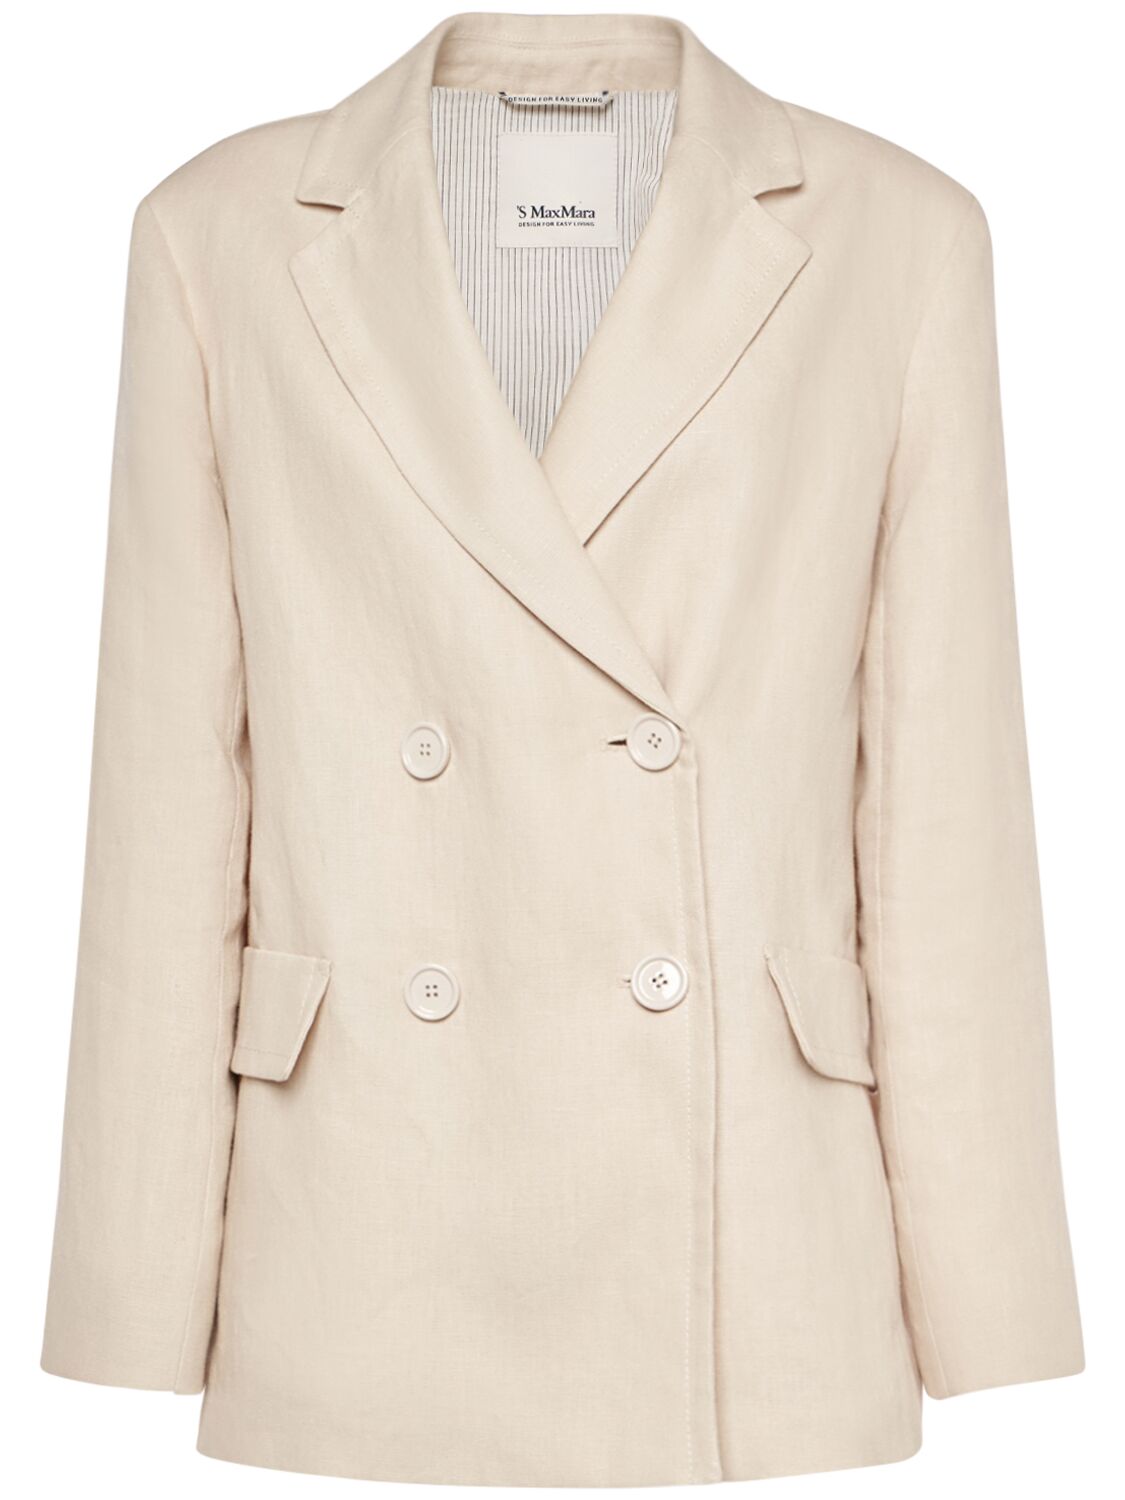 's Max Mara Laura Linen Double Breasted Jacket In Light Beige